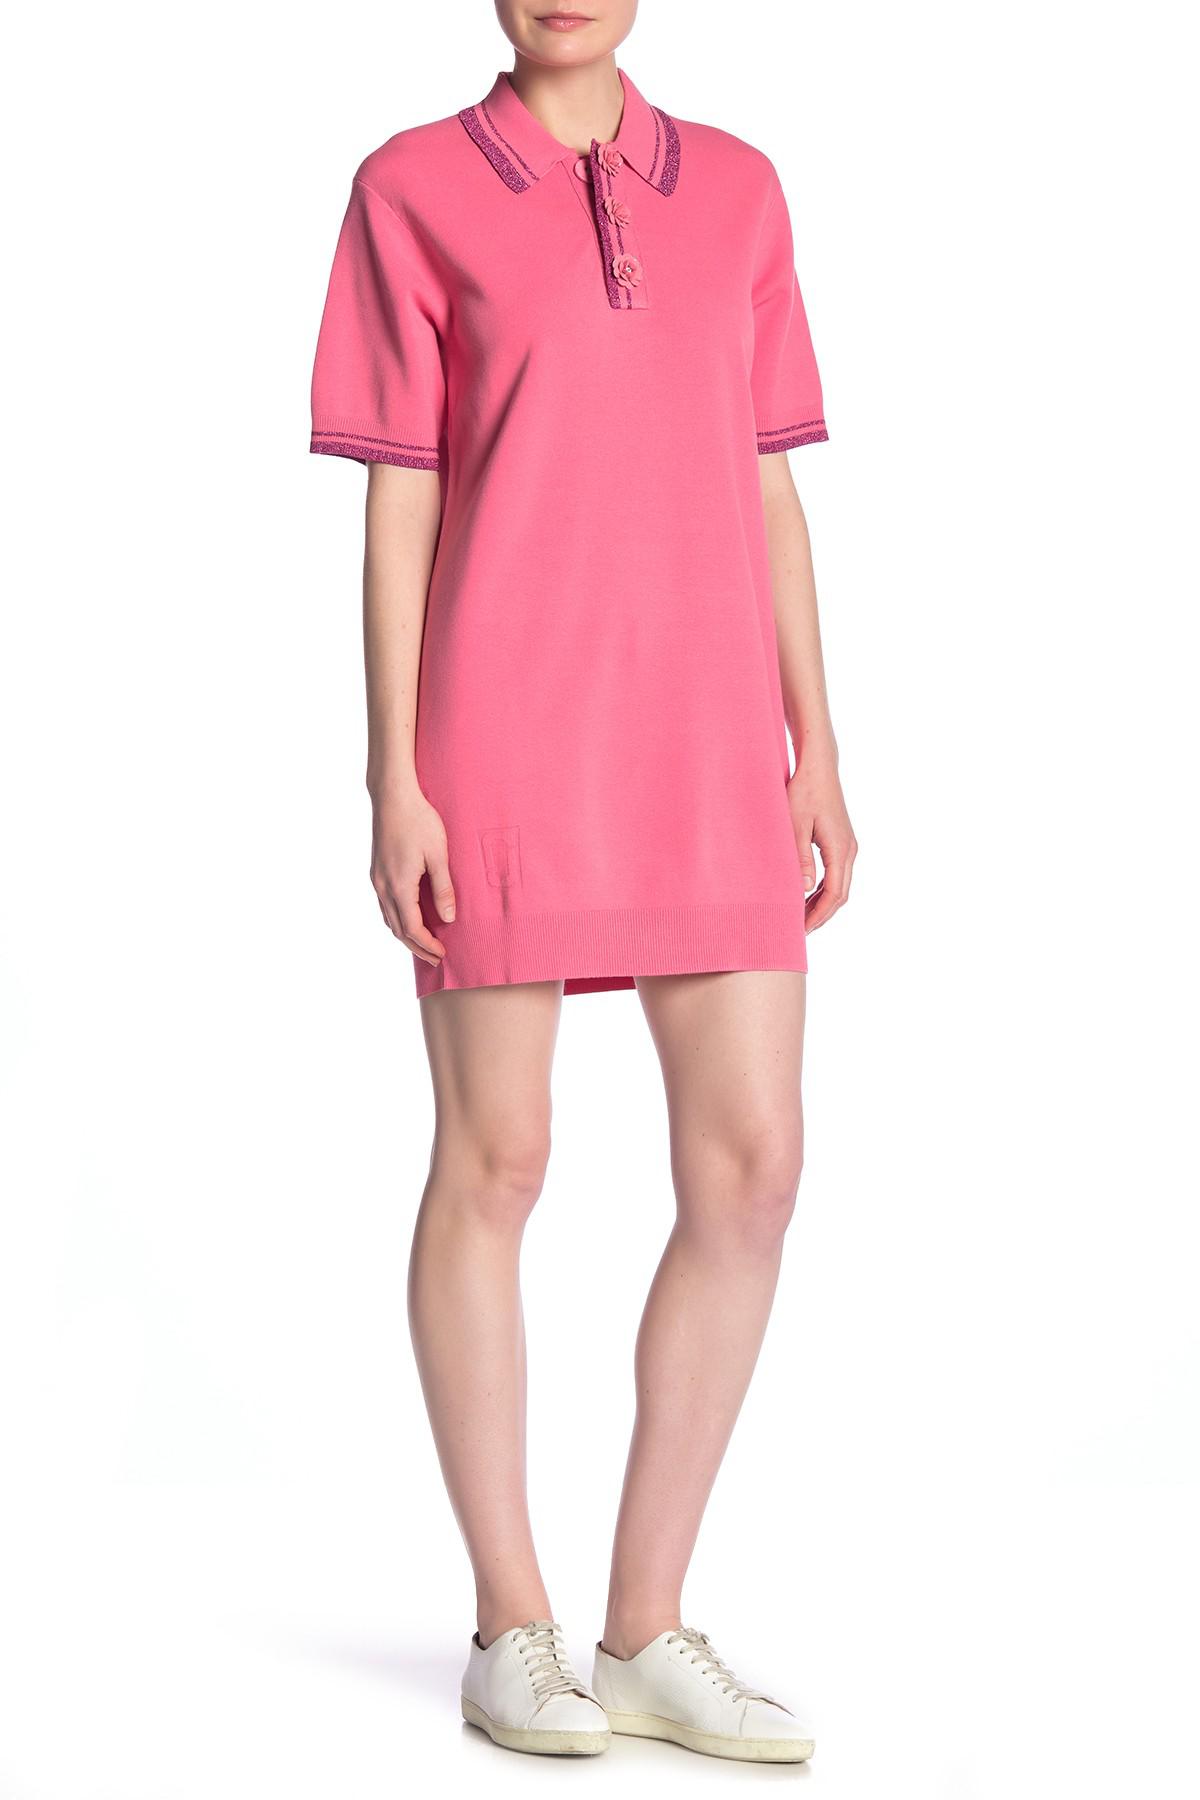 Marc Jacobs Flower Button Polo Shirt Dress in Pink | Lyst